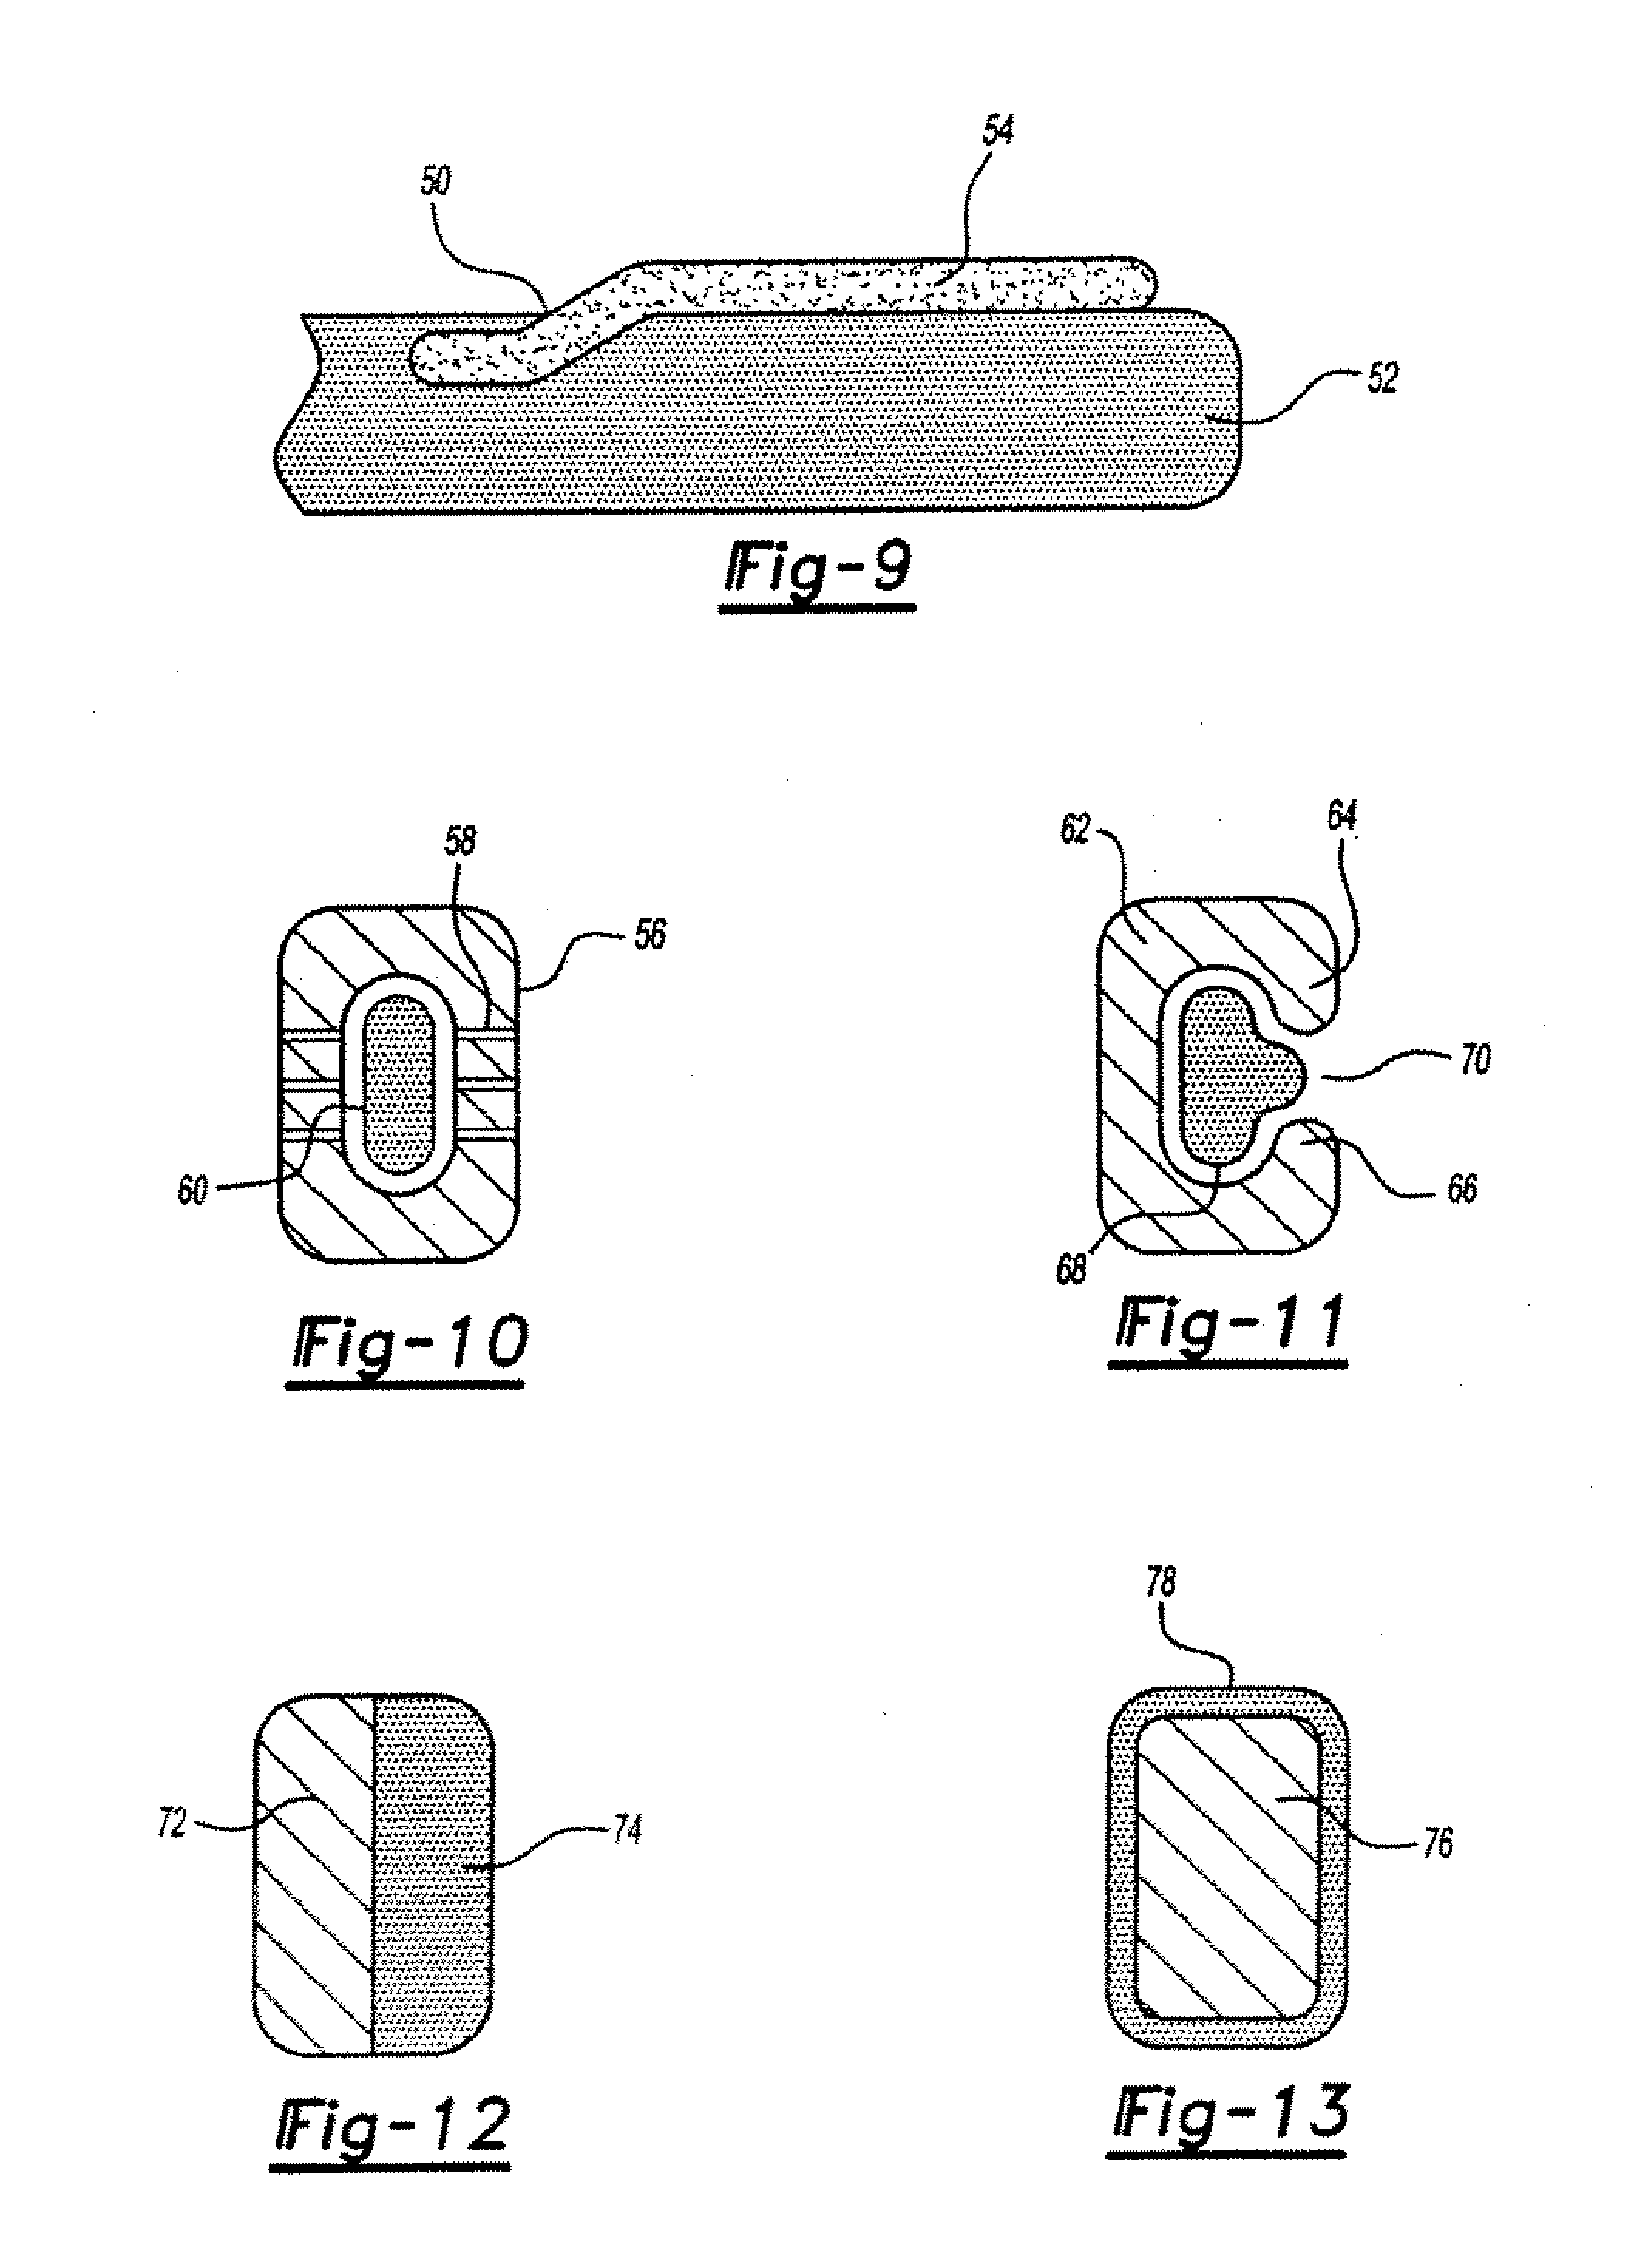 Sustained release ophthalmological device and method of making and using the same